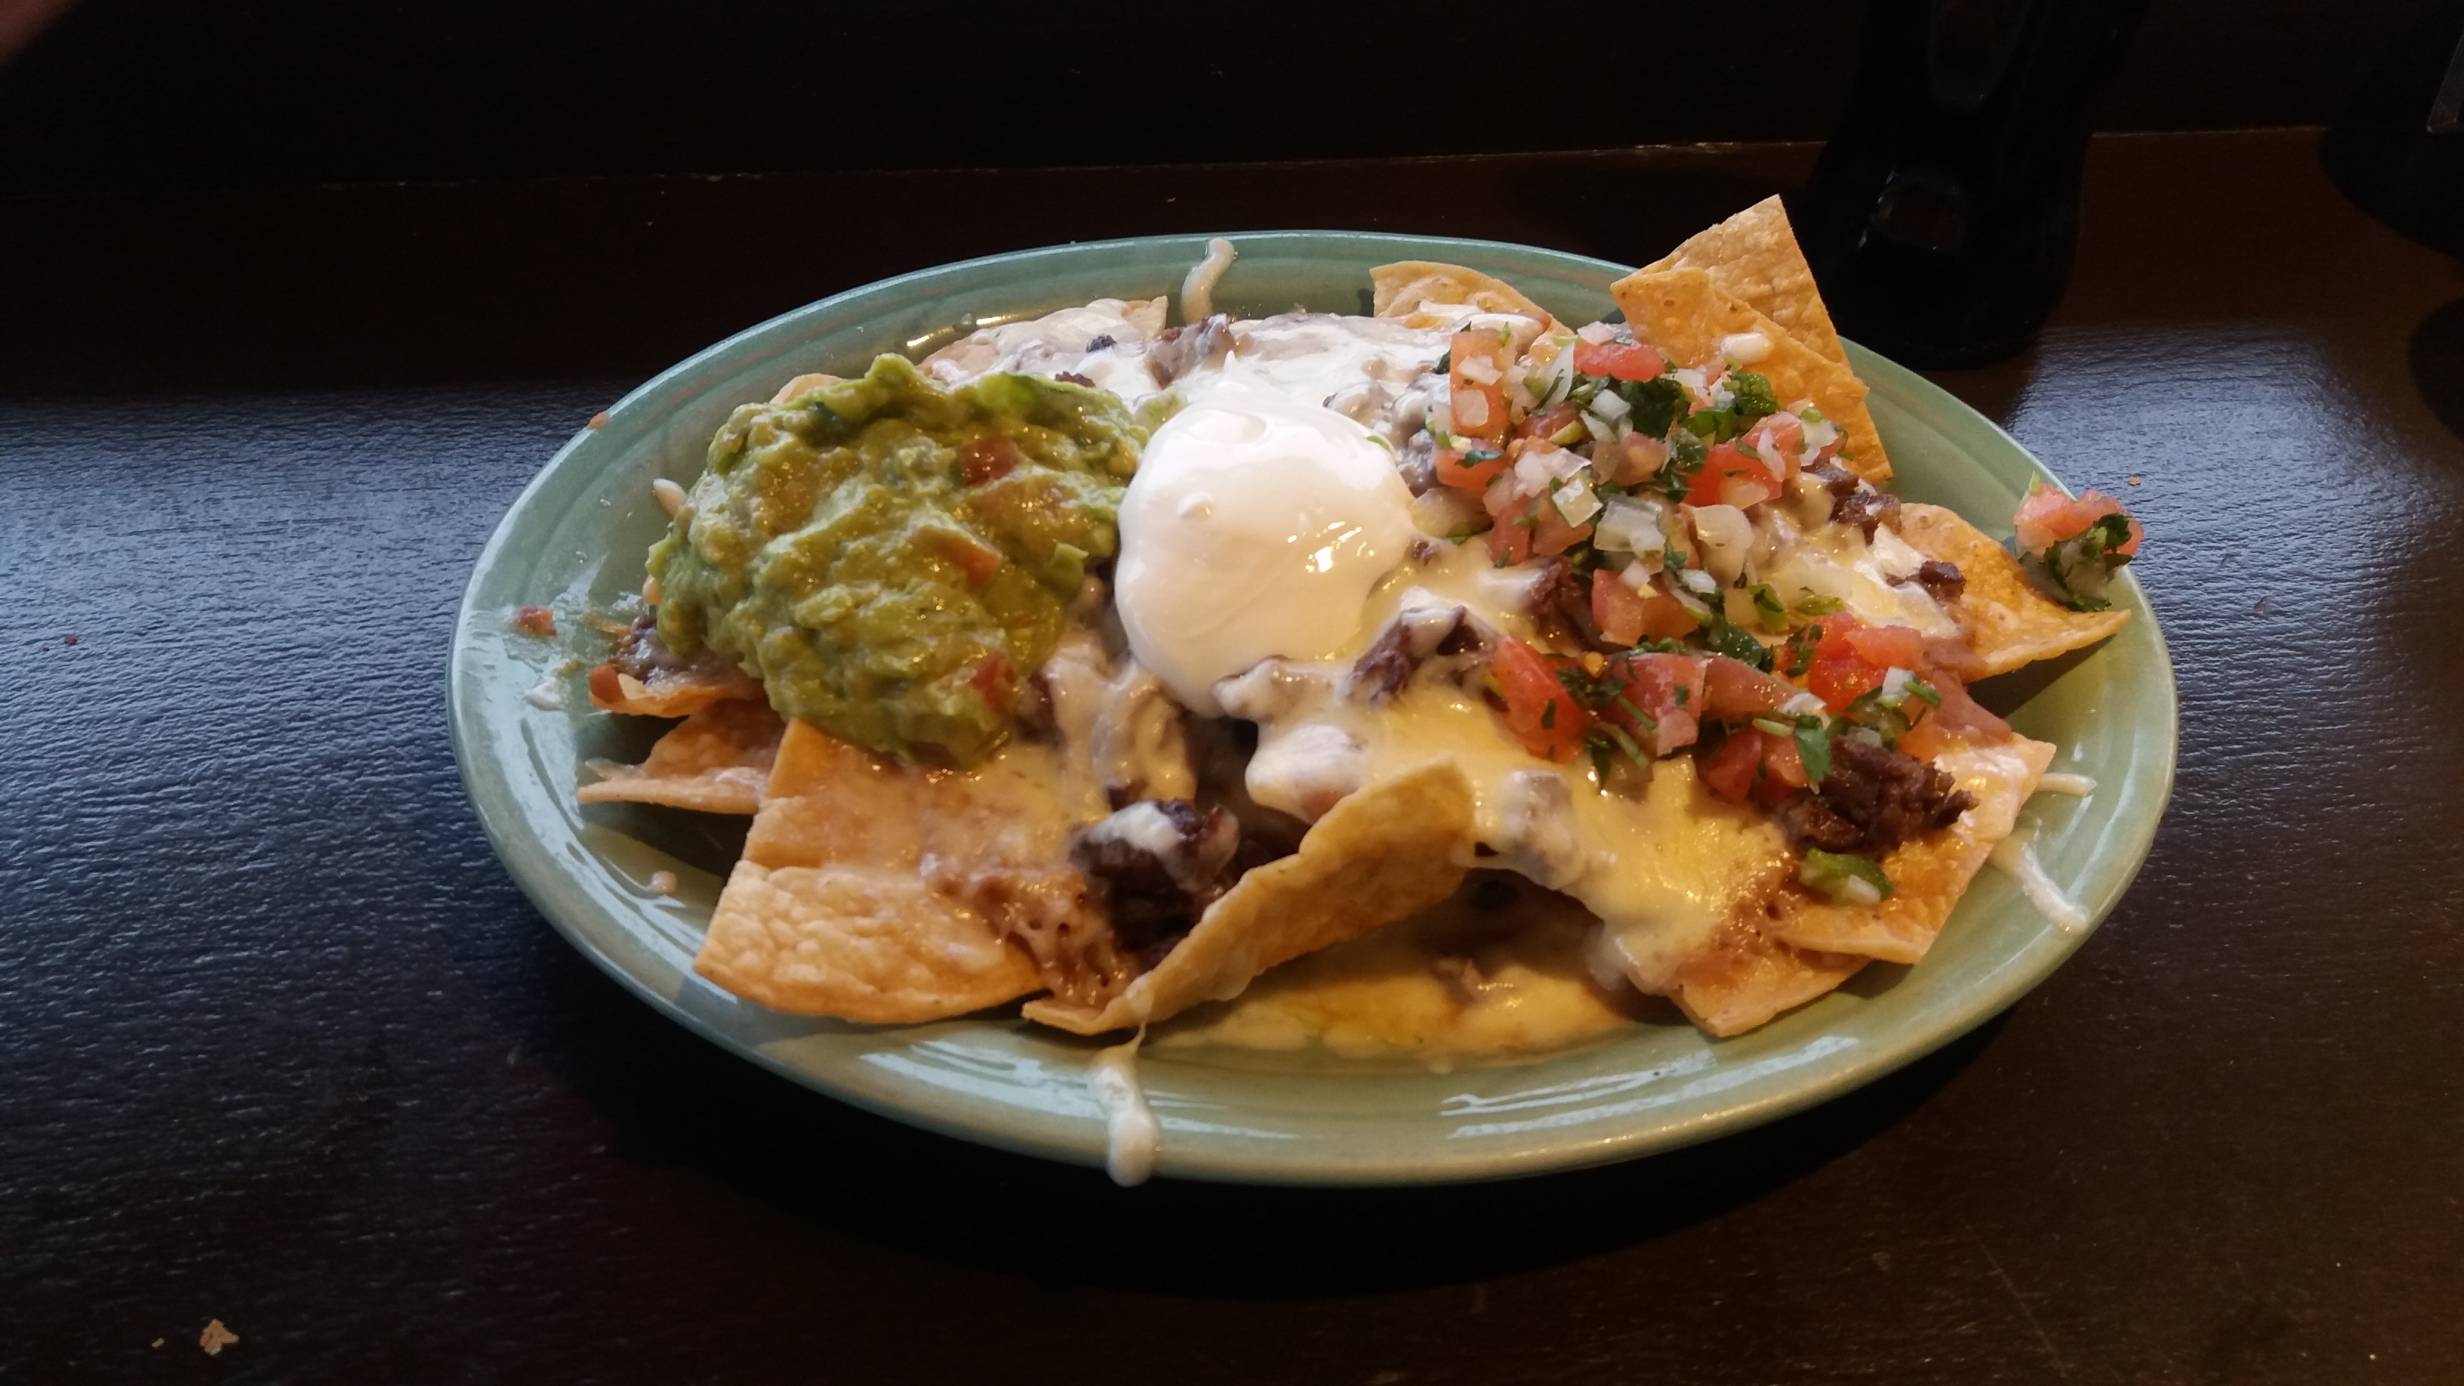 Nacho adventures: Some of the best places to get nachos